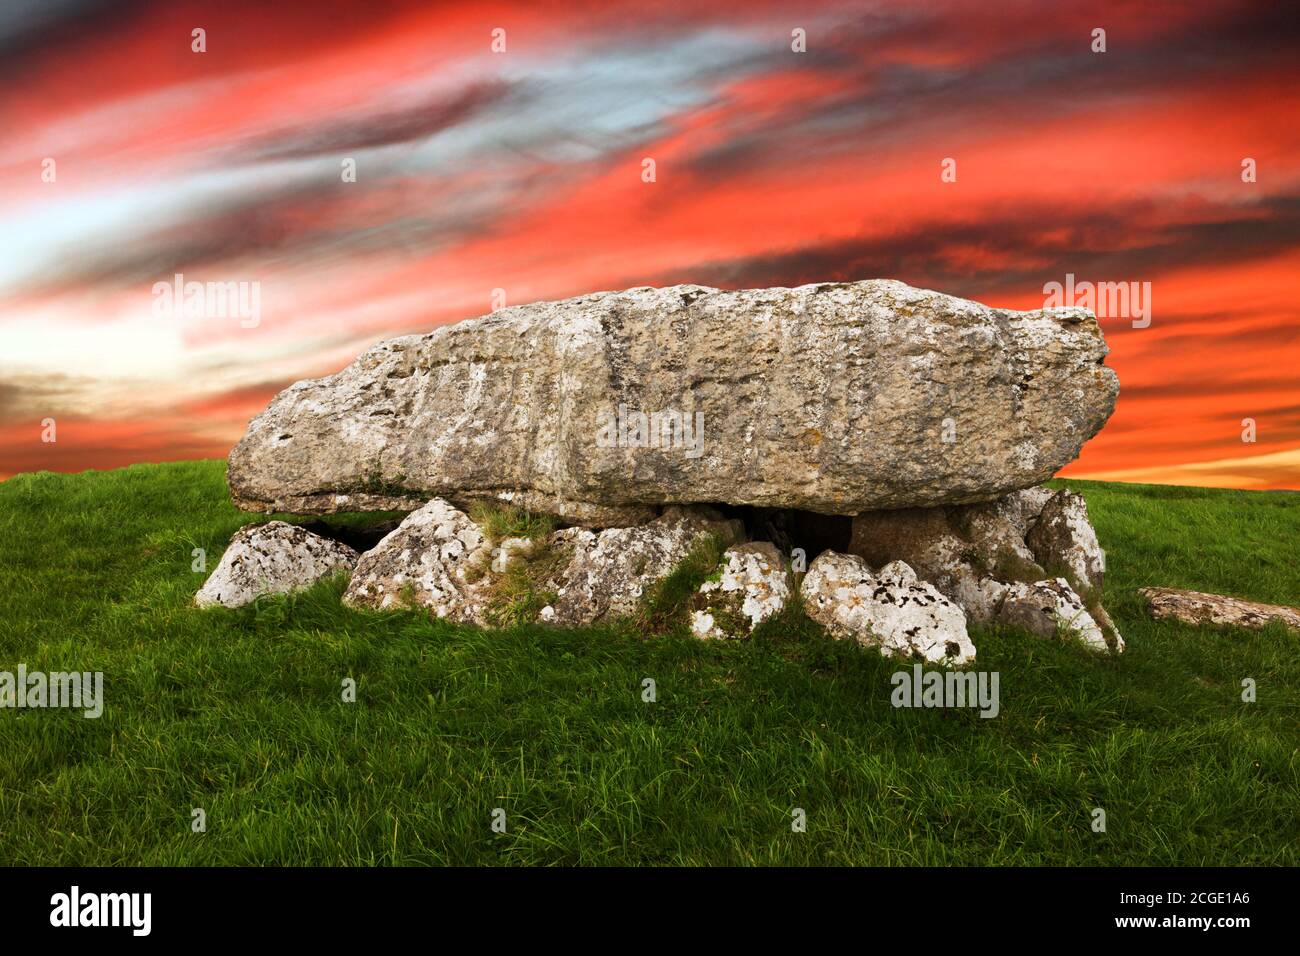 Lligwy Cromlech is a Neolithic burial chamber in Anglesey, Wales. Excavation found remains of up to 30 people. The sky and skyline has been changed. Stock Photo